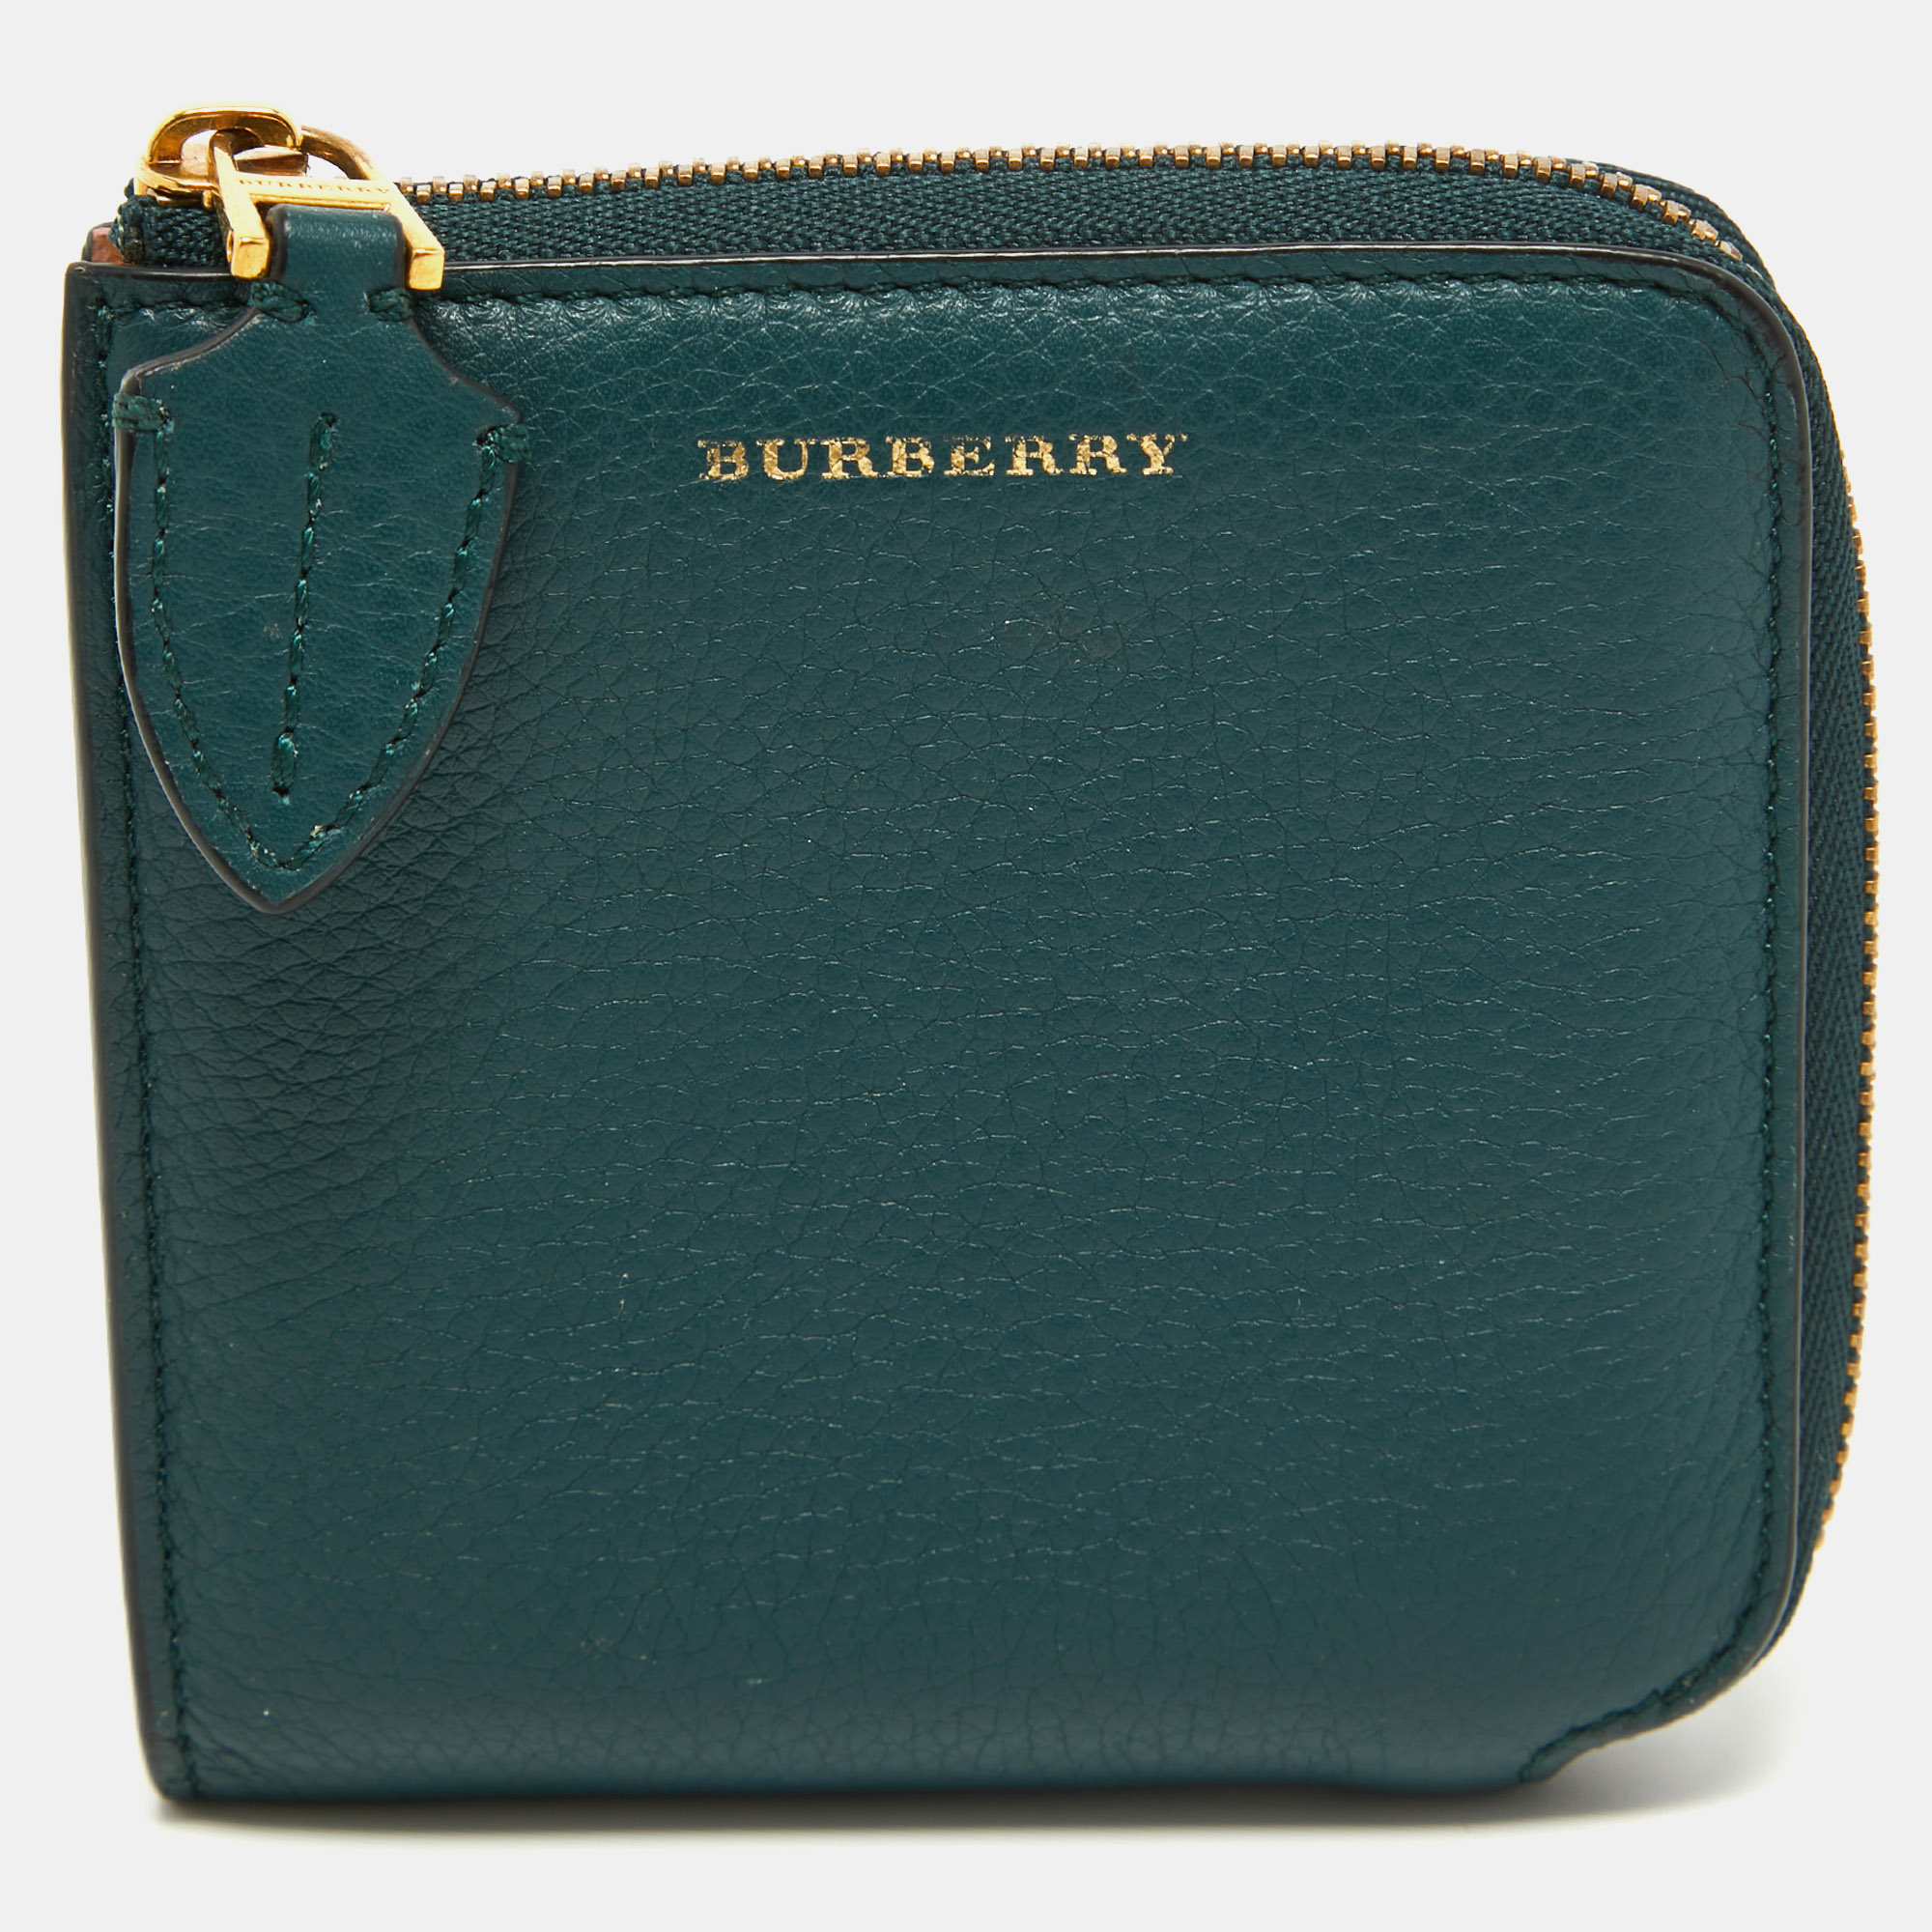 Pre-owned Burberry Green Leather Square Zip Around Compact Wallet